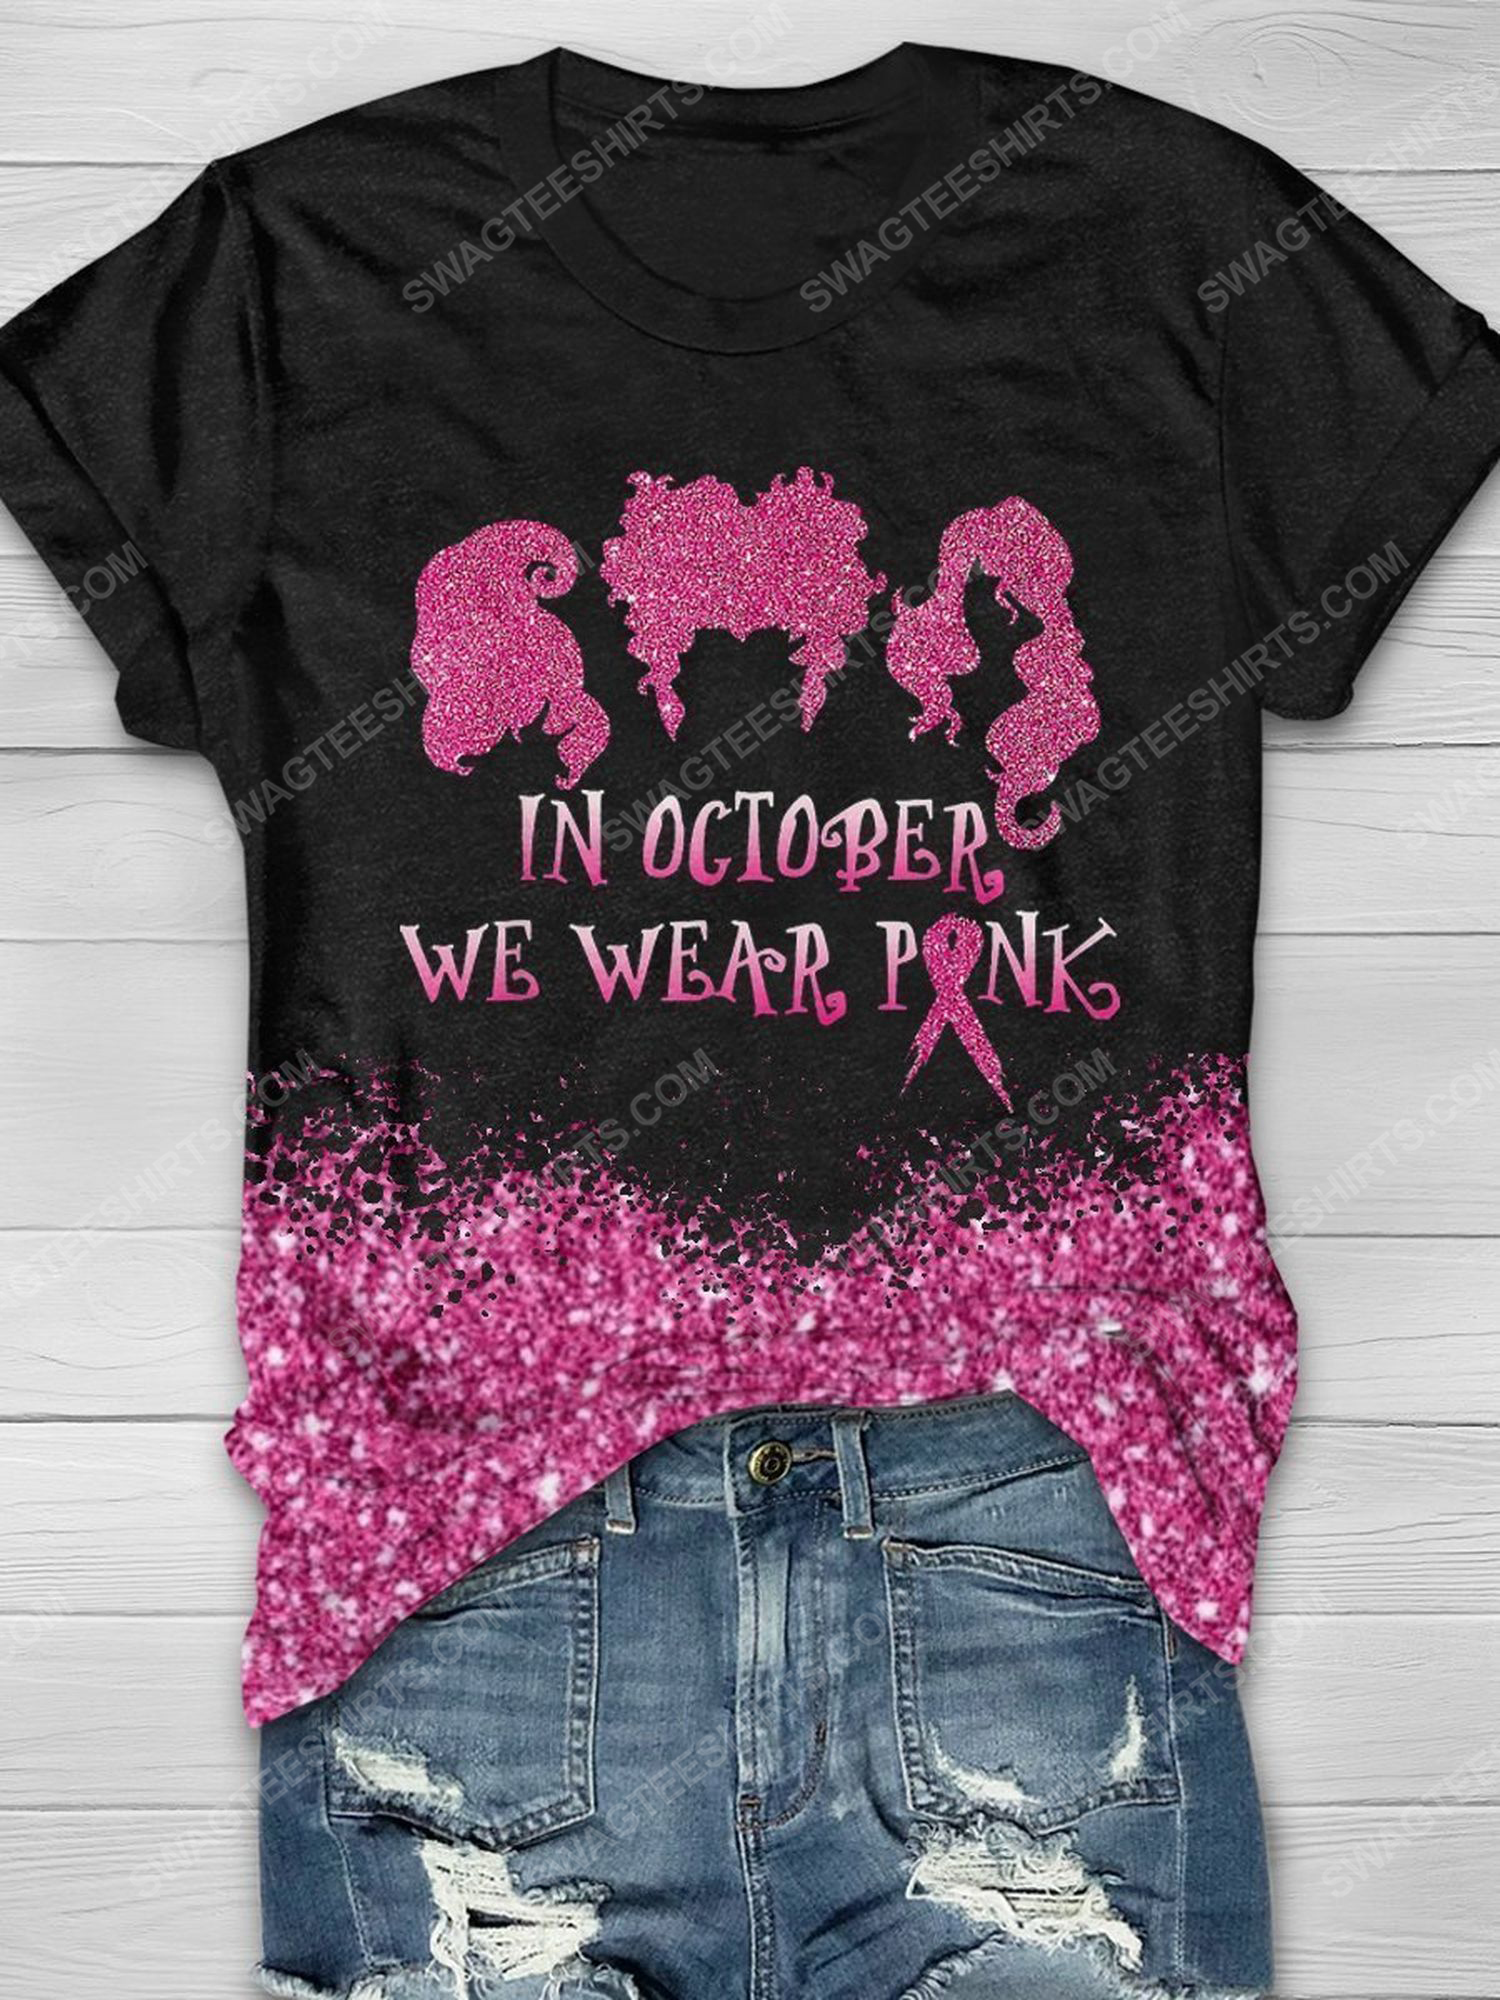 [special edition] In october we wear pink hocus pocus witches full print shirt – maria (cancer)